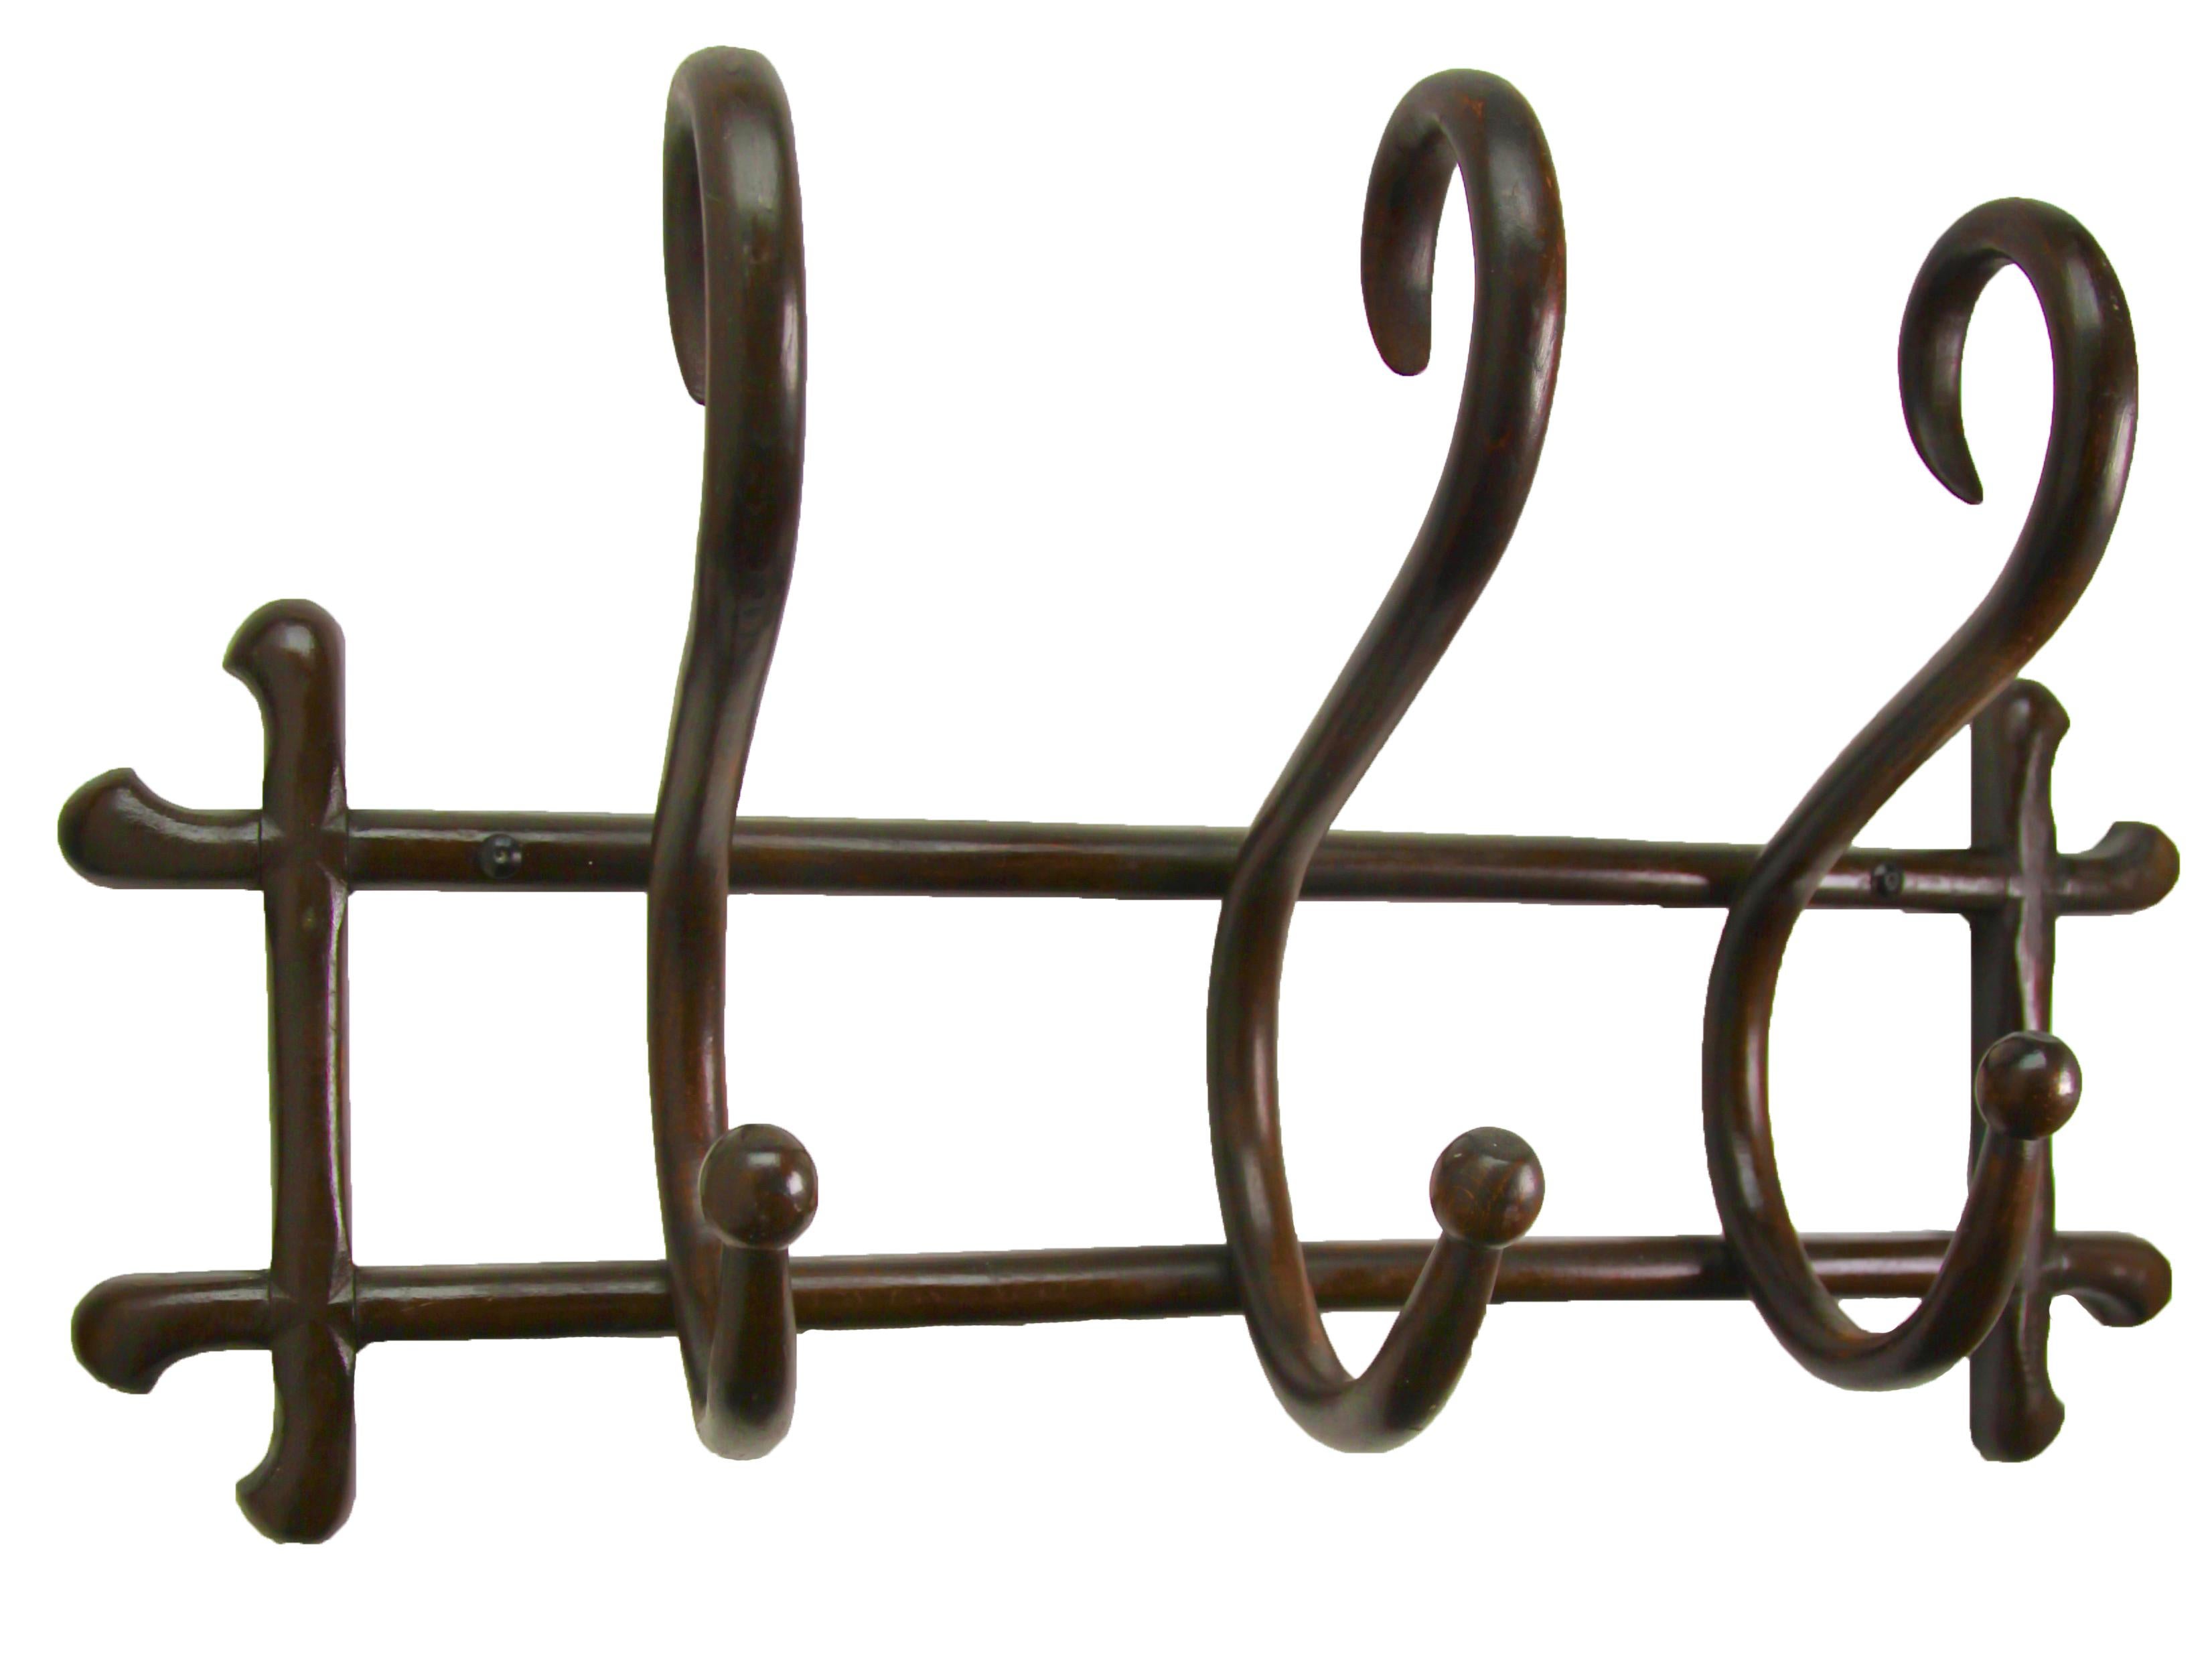 Art Nouveau bentwood wall coat rack attributed to Thonet, Vienna, 

Viennese wall hanger Thonet was included in the production program of the company Gebrüder Thonet around the Year 1879. Original 'Thonet'
Very rare and interesting finish,